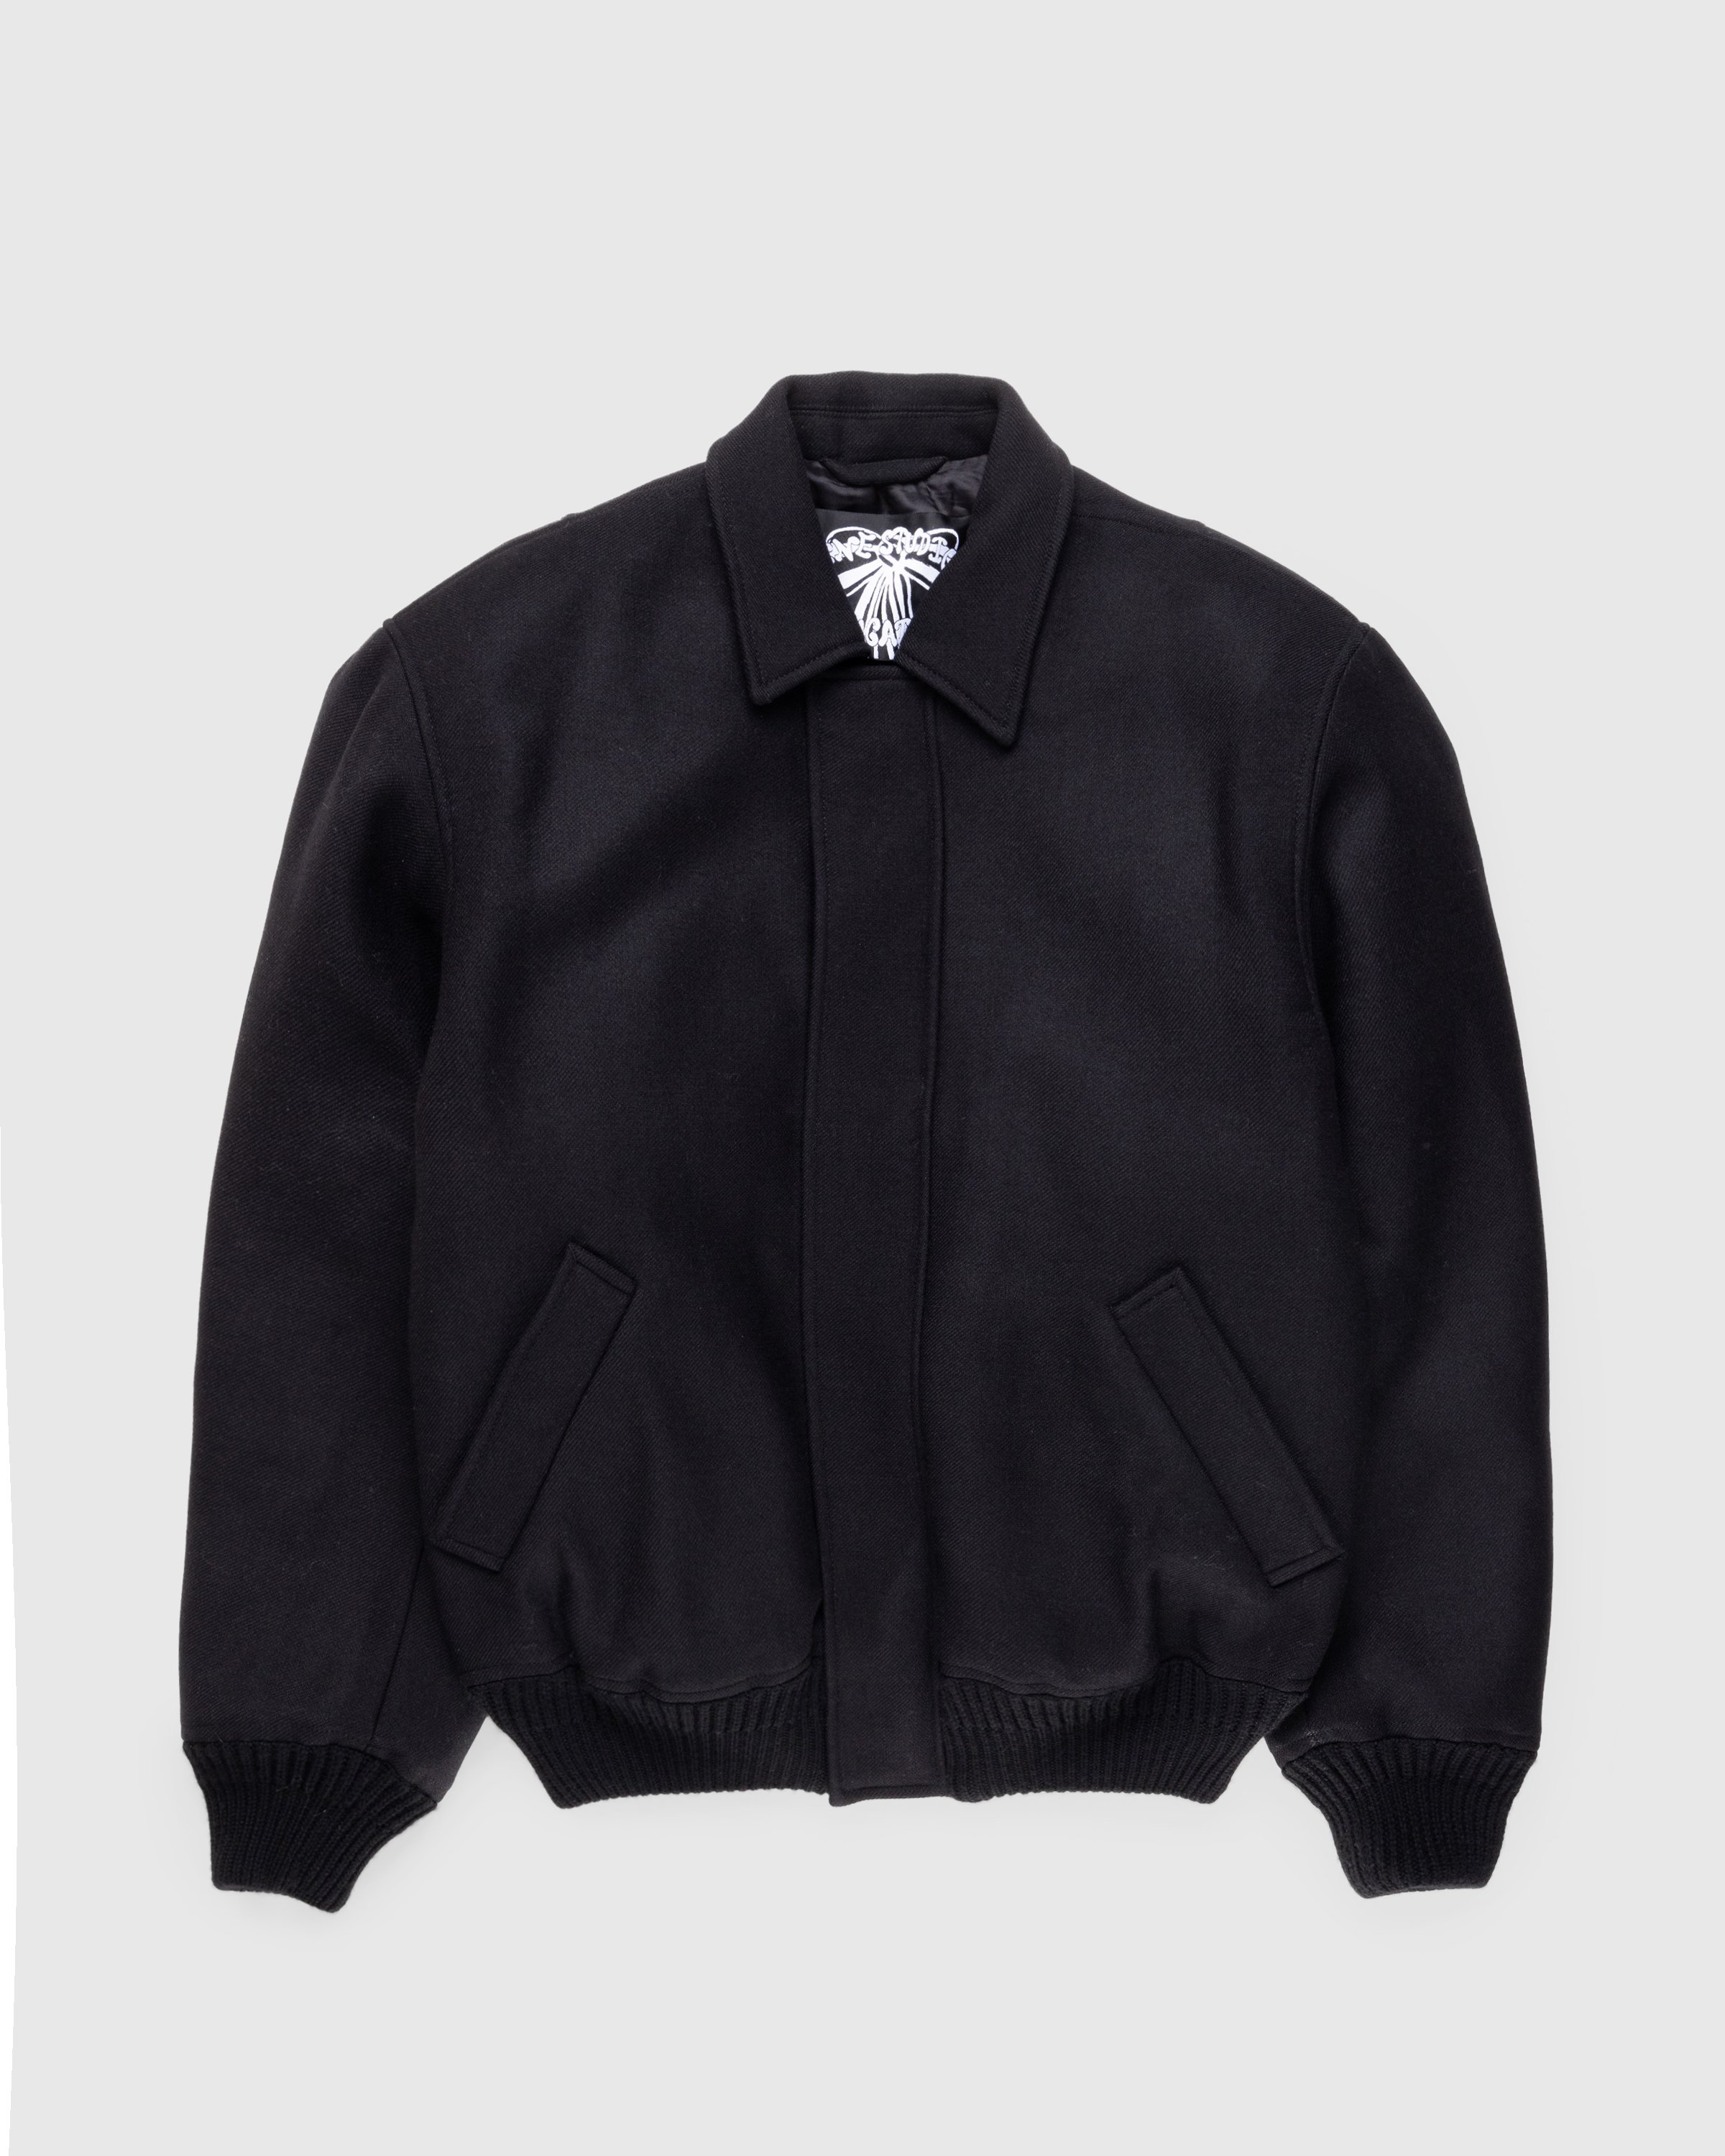 Carhartt WIP – Paxon Bomber Black/Stone Washed